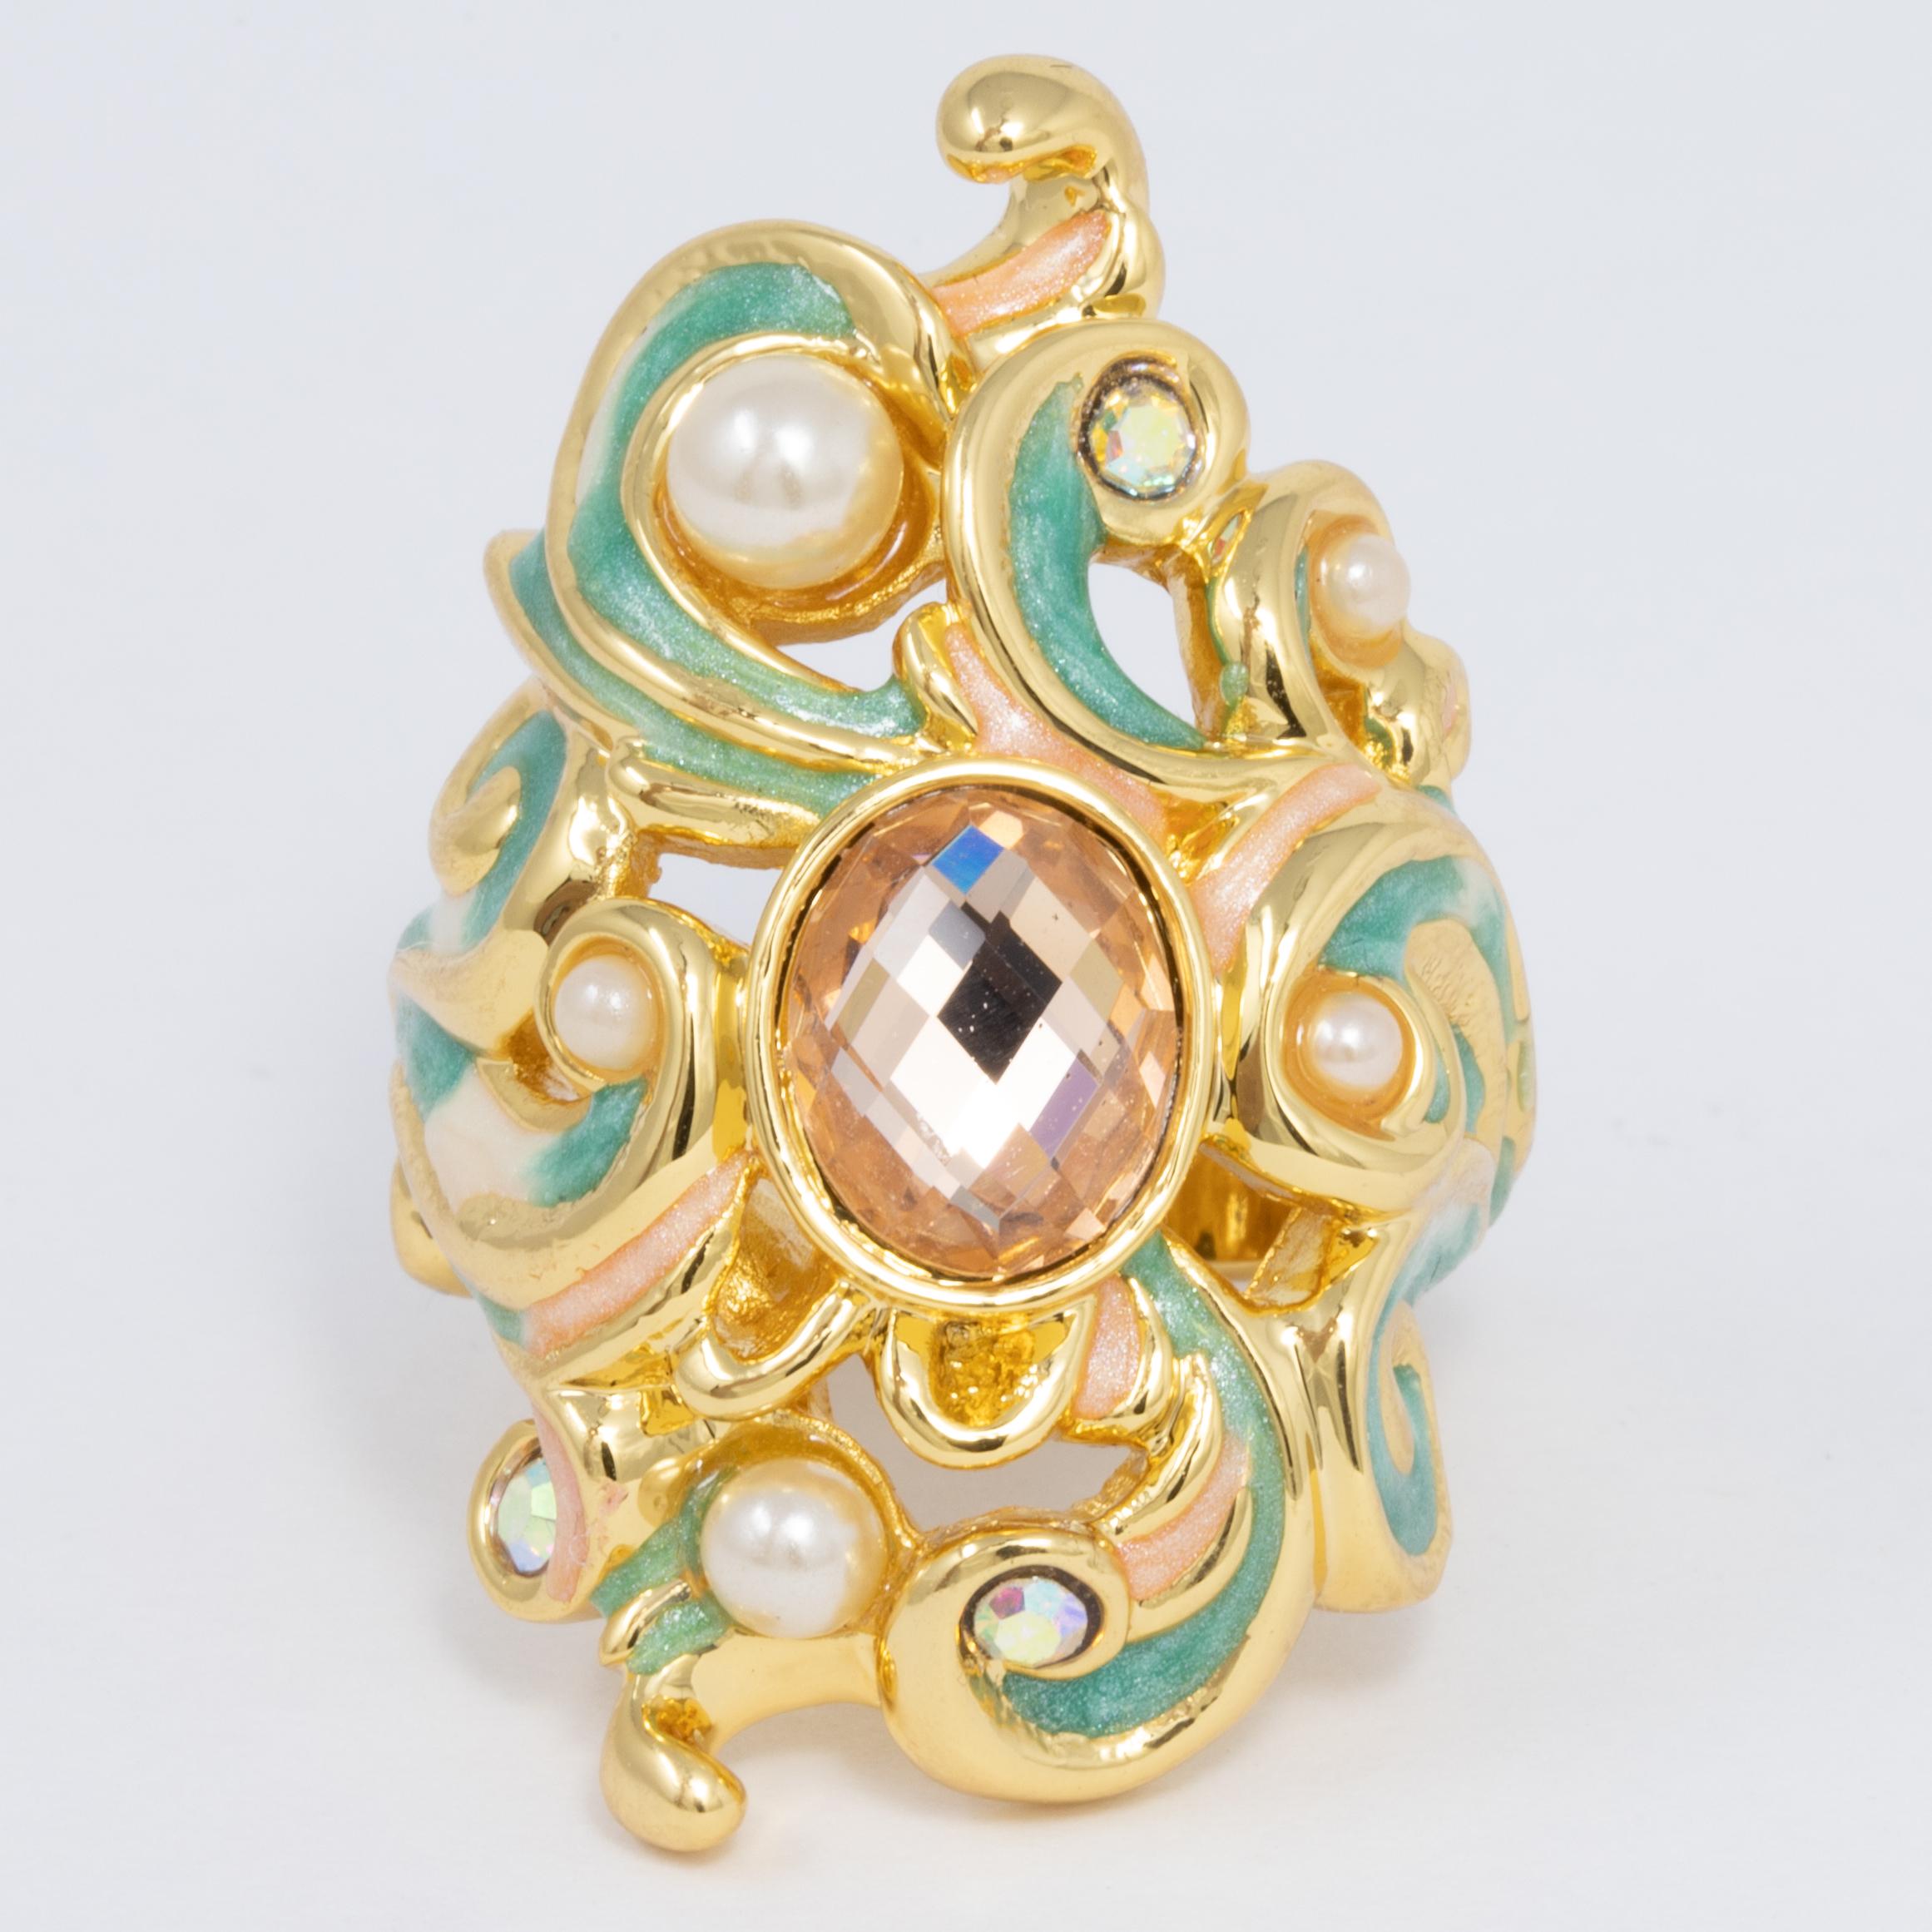 A colorful statement ring straight out of a fairy tale! This stylish accessory features a magical scroll design, painted in green enamel and accented with faux pearls and crystals.

Ring size US 7.5

Hallmarks: Jay, Jay Strongwater, CN

By Jay